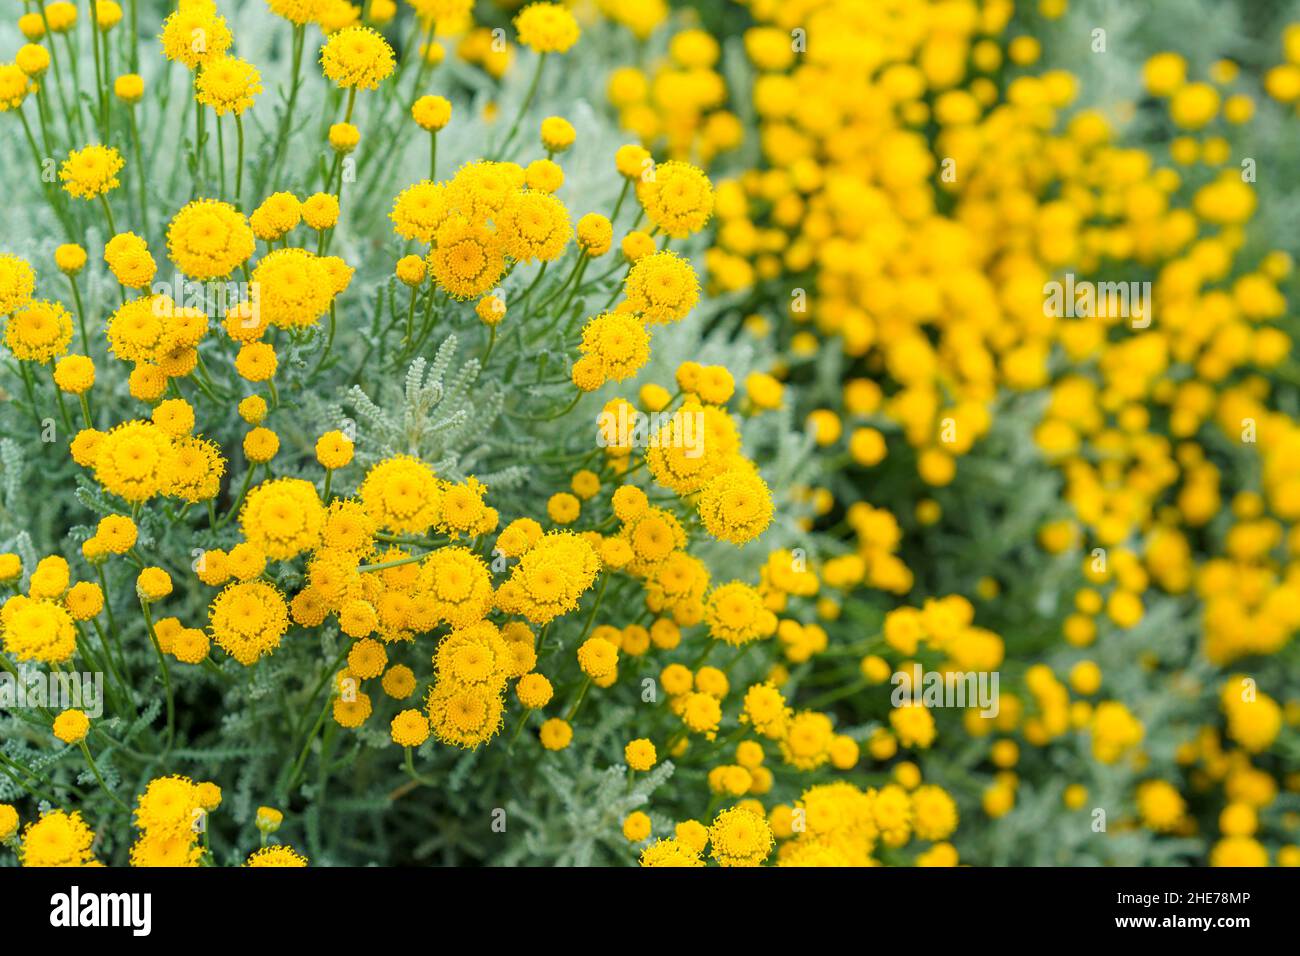 Decorative flowers of yellow tansy on a flower bed. Stock Photo